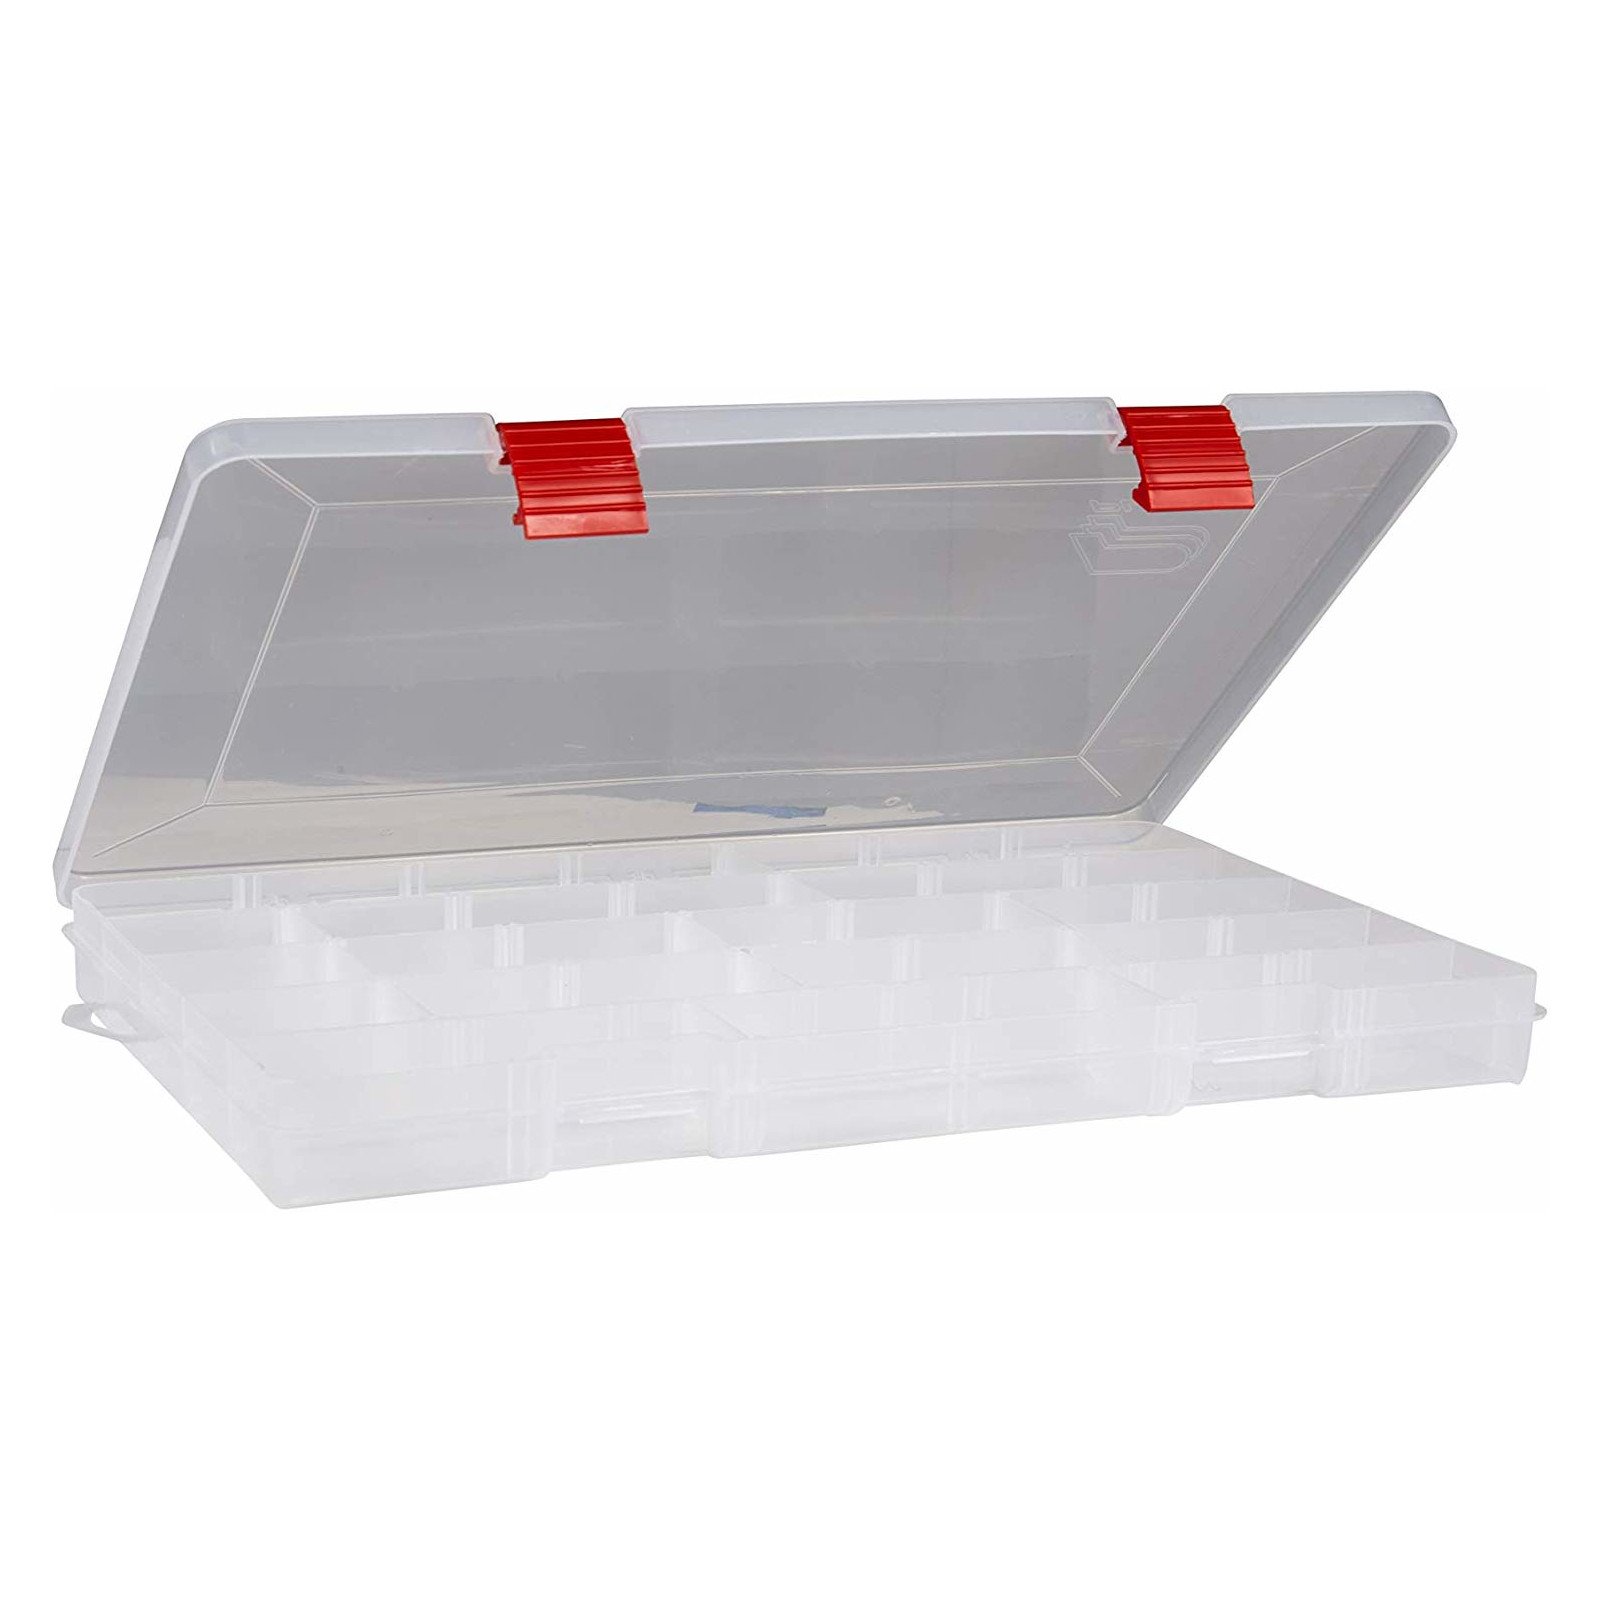 Plano Magnum Double Sided Tackle Box - Filled